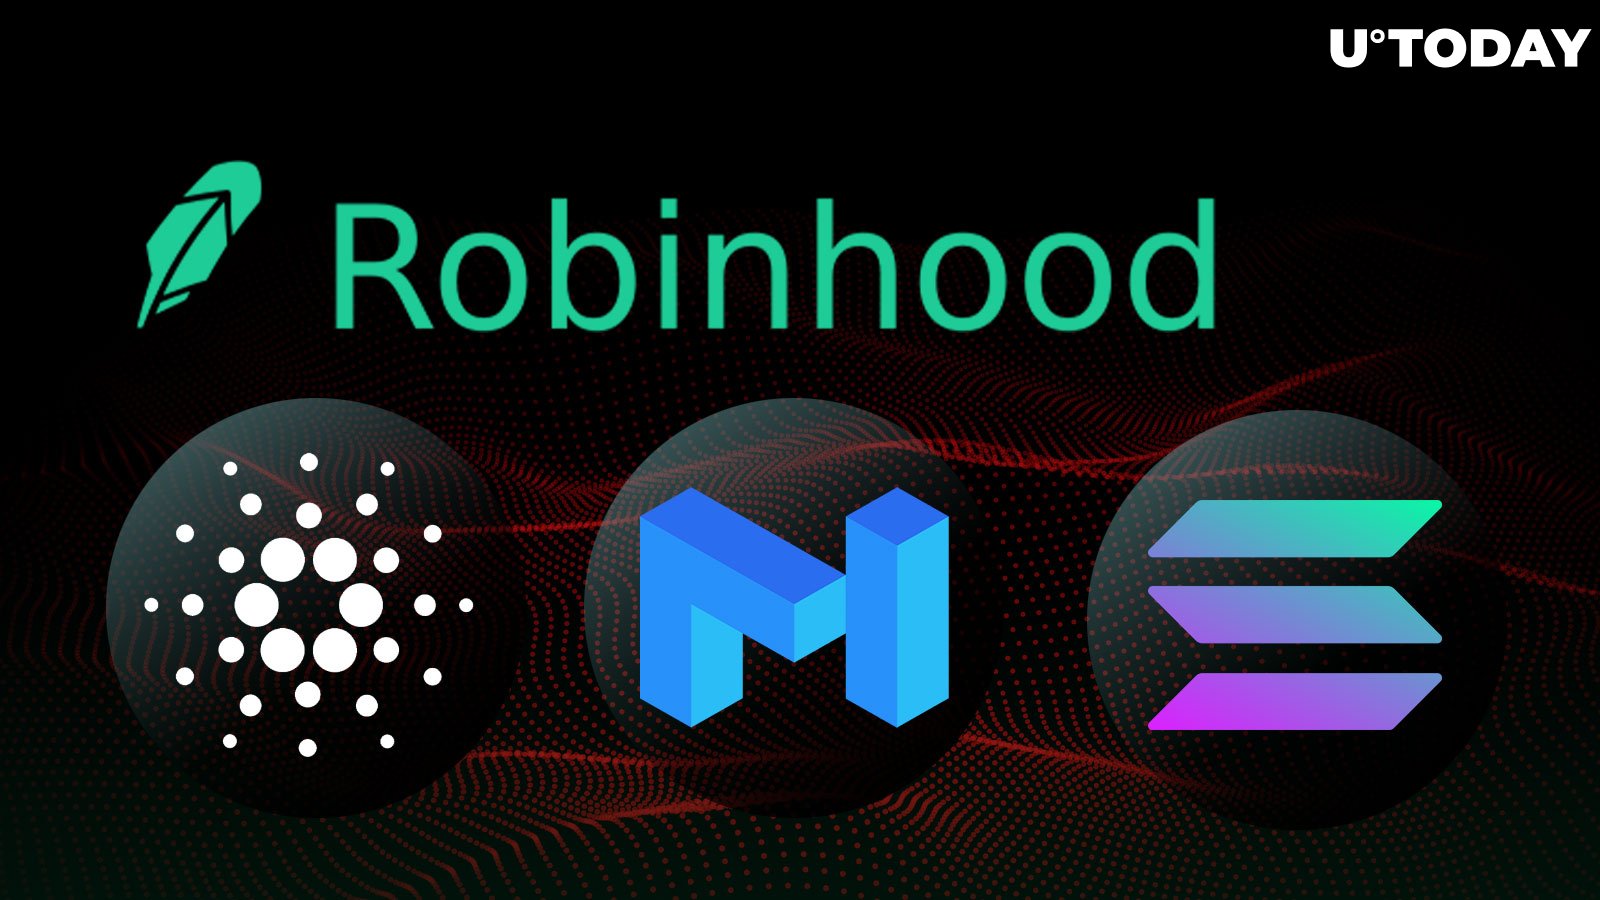 Cardano (ADA), Polygon (MATIC), and Solana (SOL) to Be Dropped by Robinhood. What About Dogecoin (DOGE) and Shiba Inu (SHIB)?